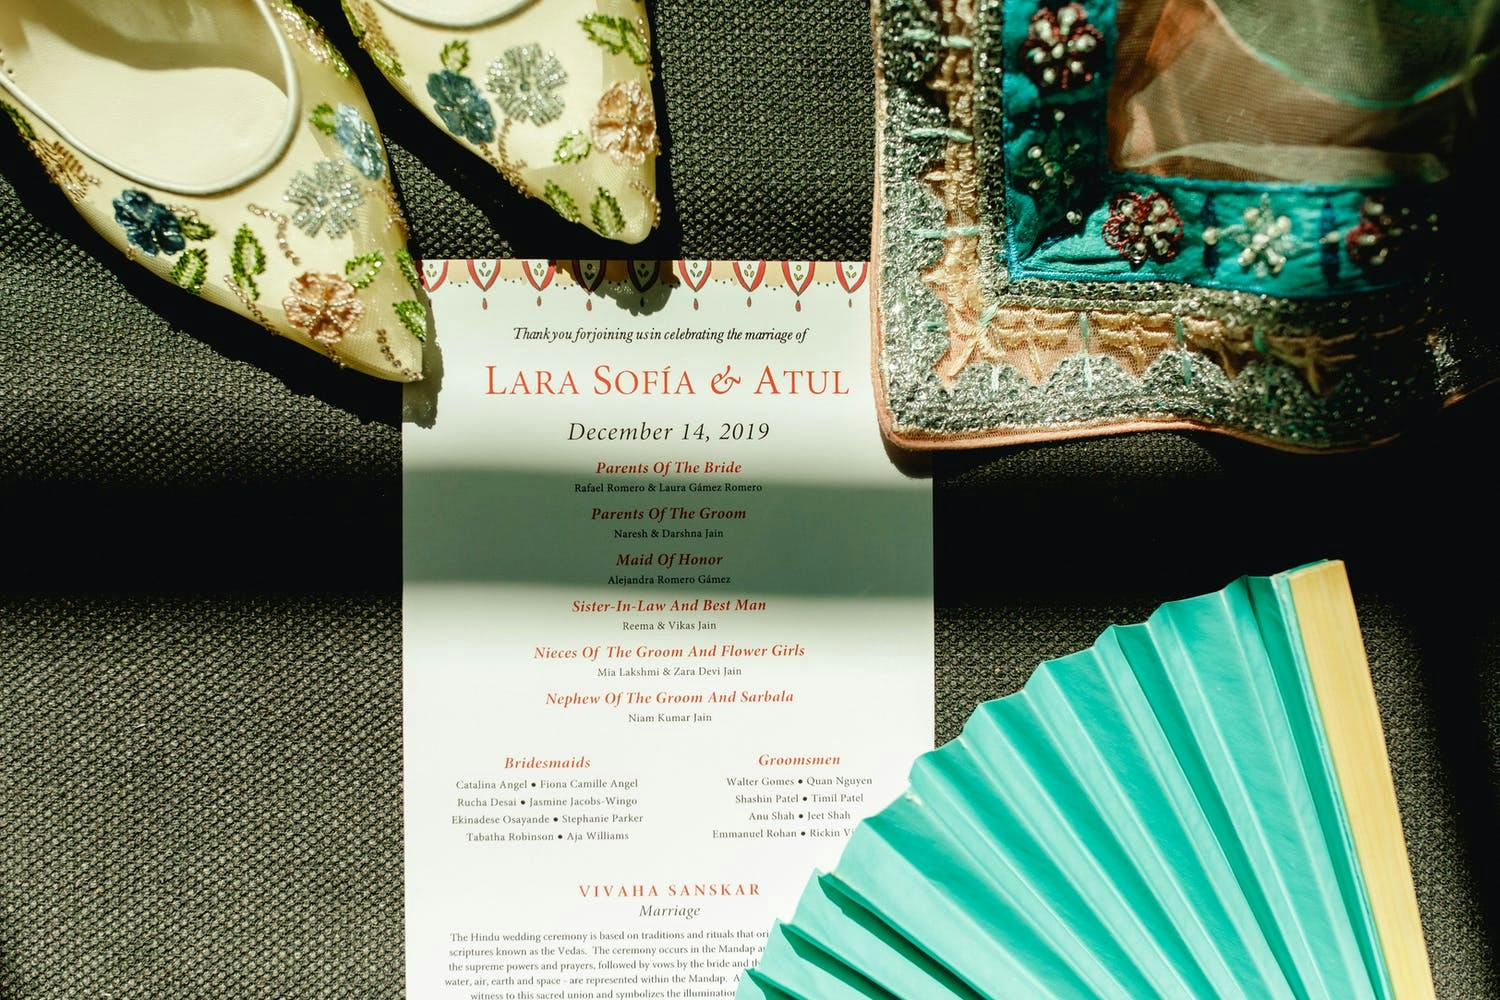 Latin-Indian wedding invitation, teal hand-held fan, and embroidered shoes | PartySlate